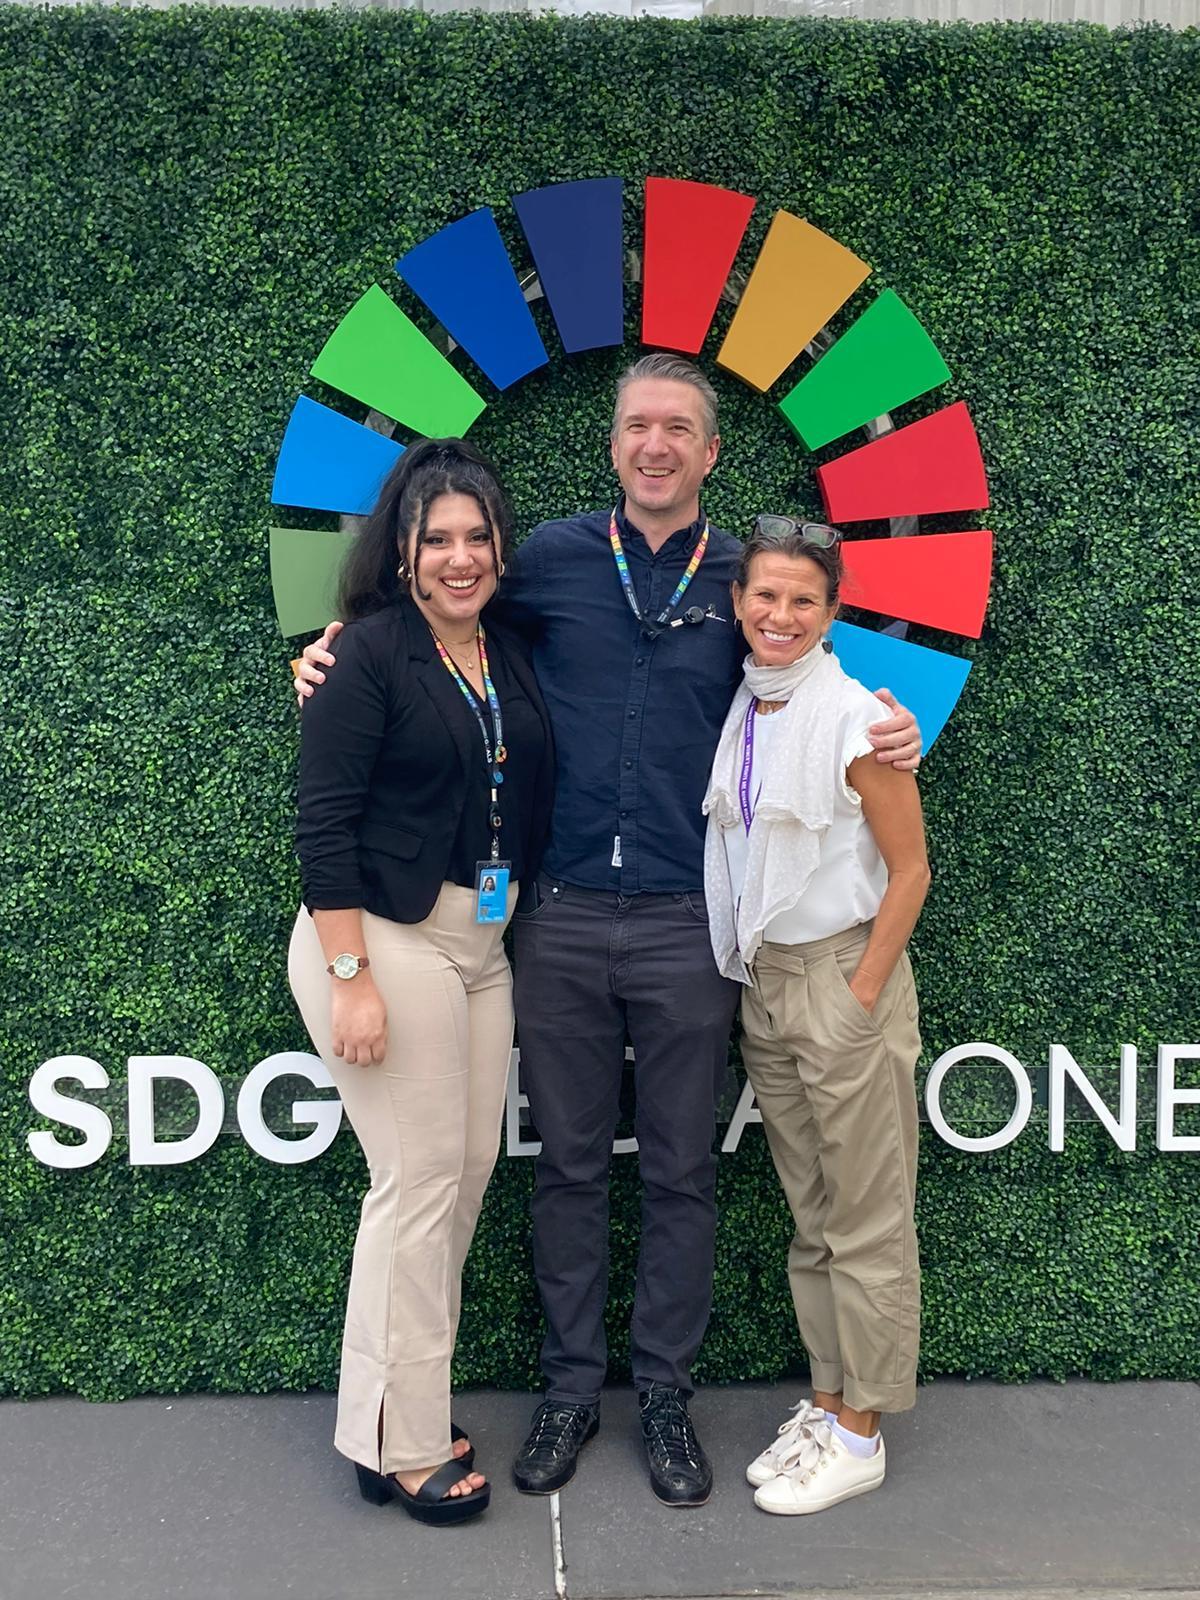 Jennifer Krottinger (right) stands with a man and a woman in front of a faux greenery background with the UN's SDG logo